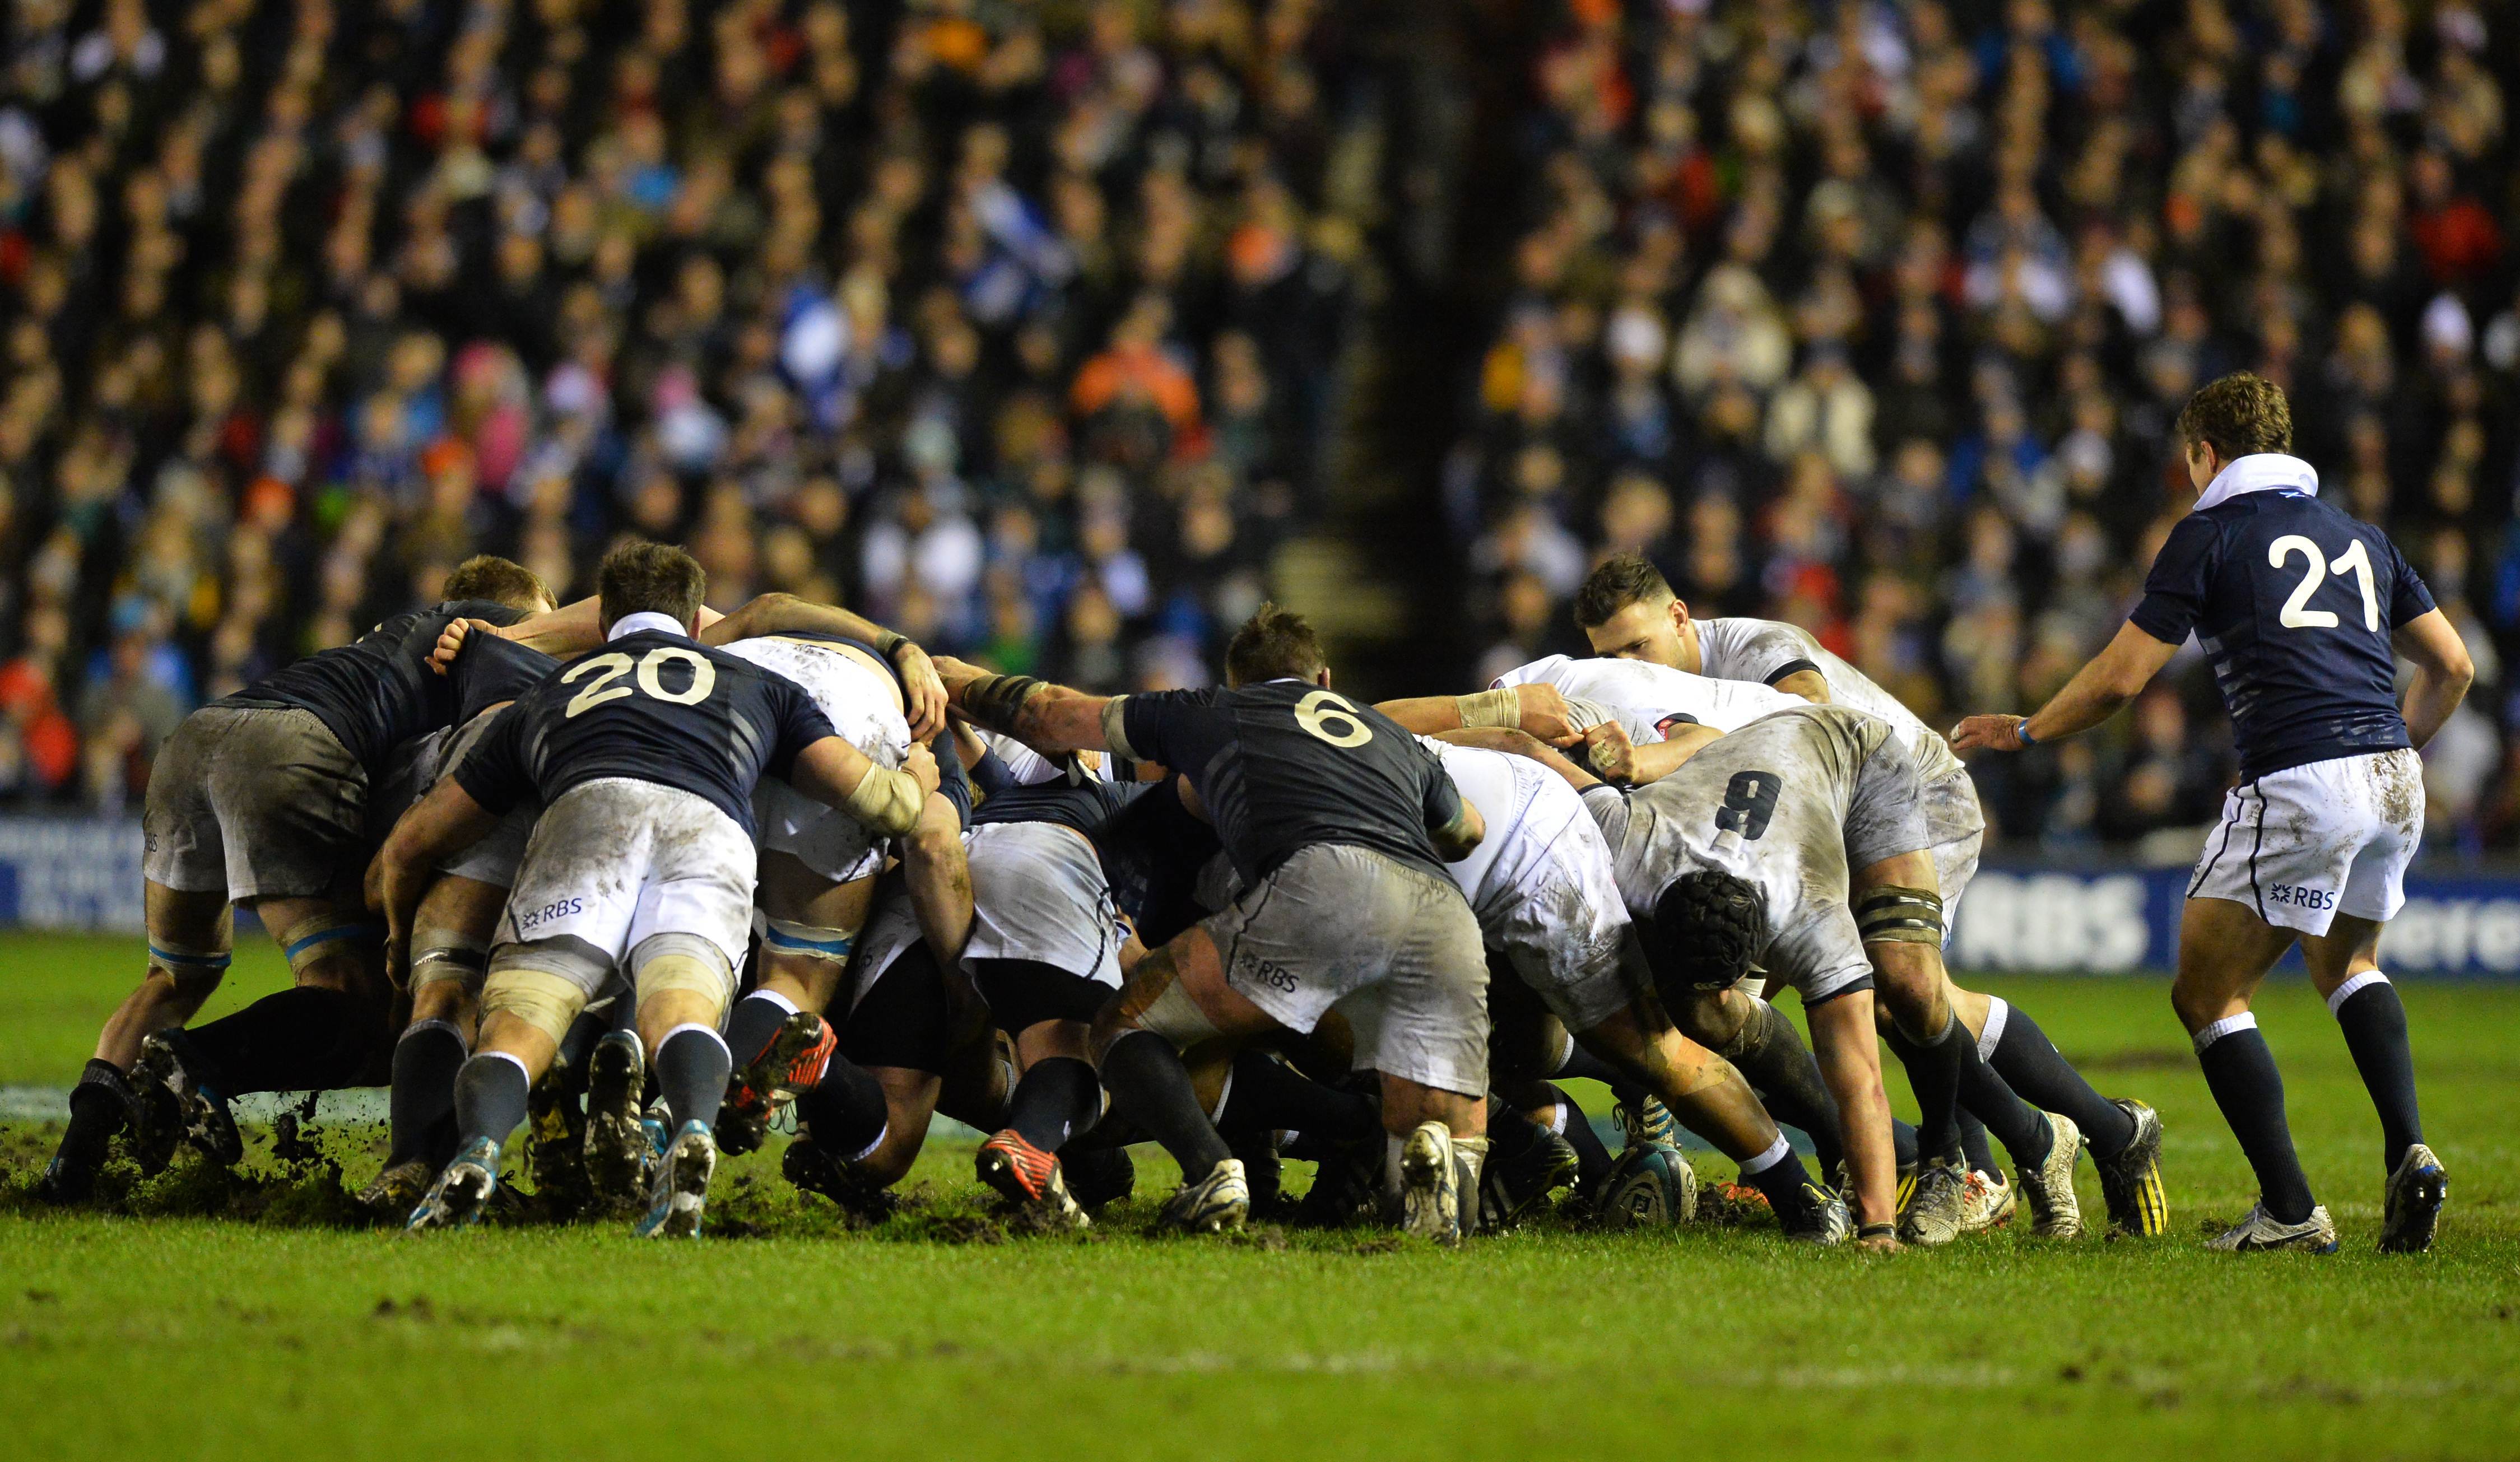 Much depends on the Scottish scrum improving, according to Nathan Hines. Photo: AFP